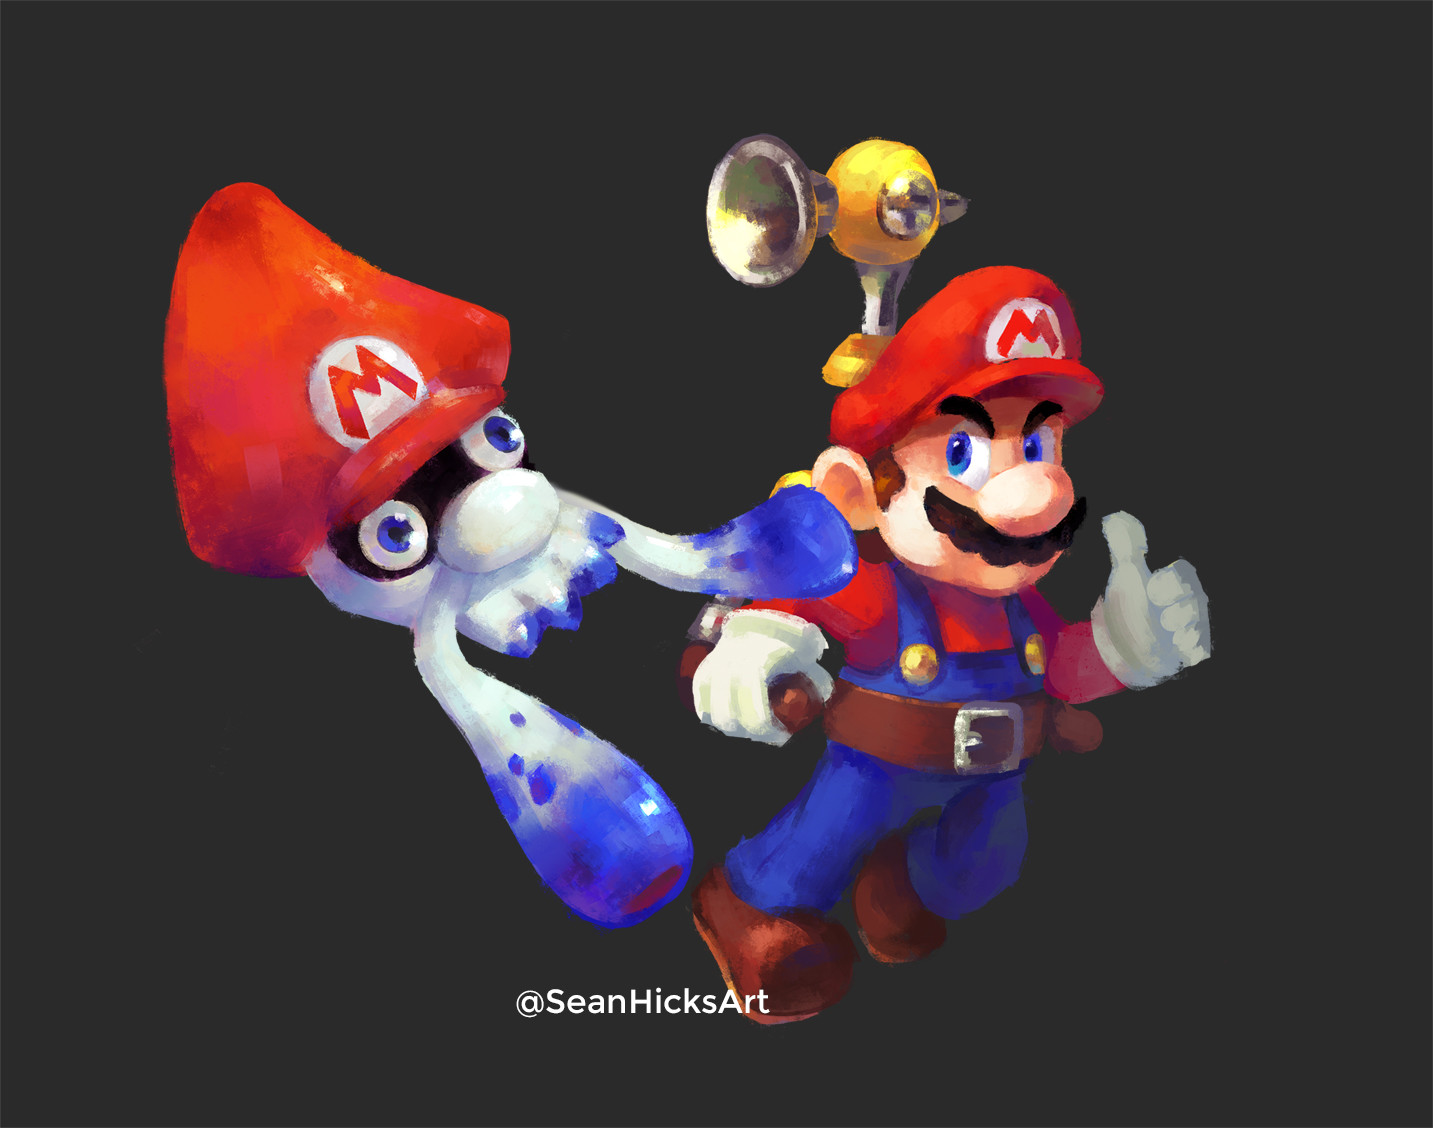 A painting of Mario and his "squid" form. The squid form was based off of the Gooper Blooper: a boss from the game, Super Mario Sunshine. I tried to make sure the theme or references of the game stayed intact for the crossover. 